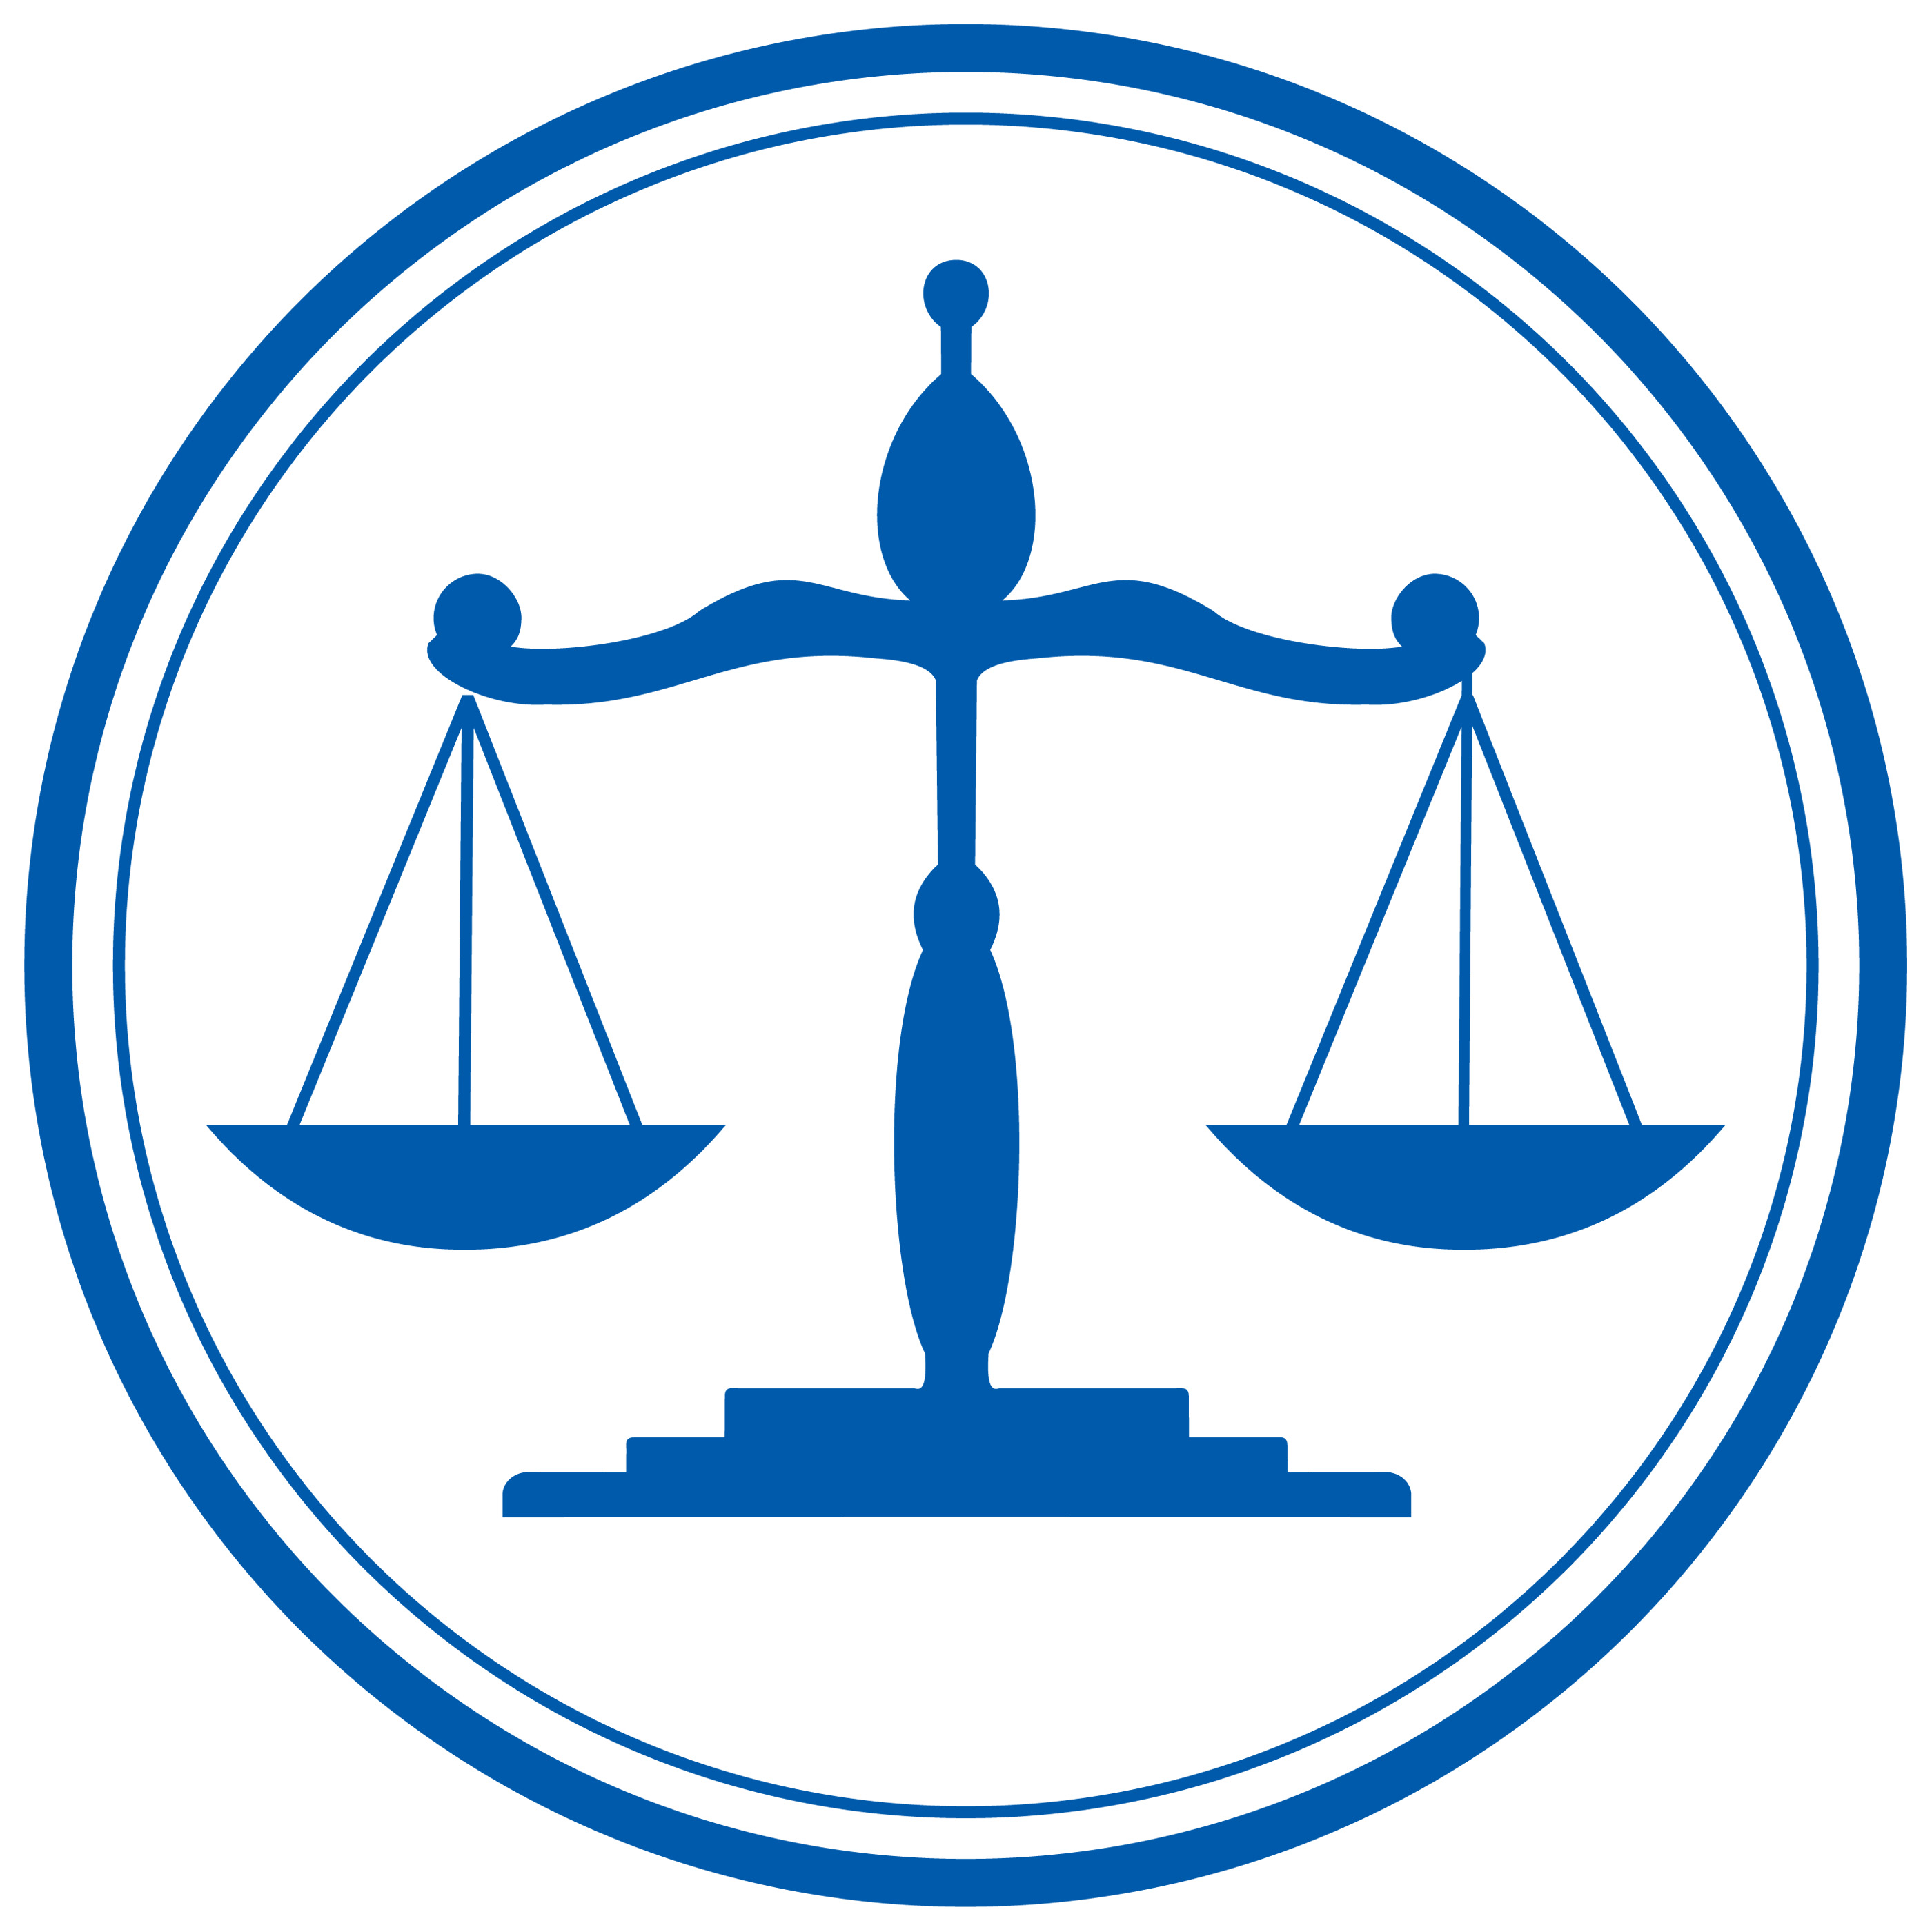 Scales Of Justice Symbol - ClipArt Best